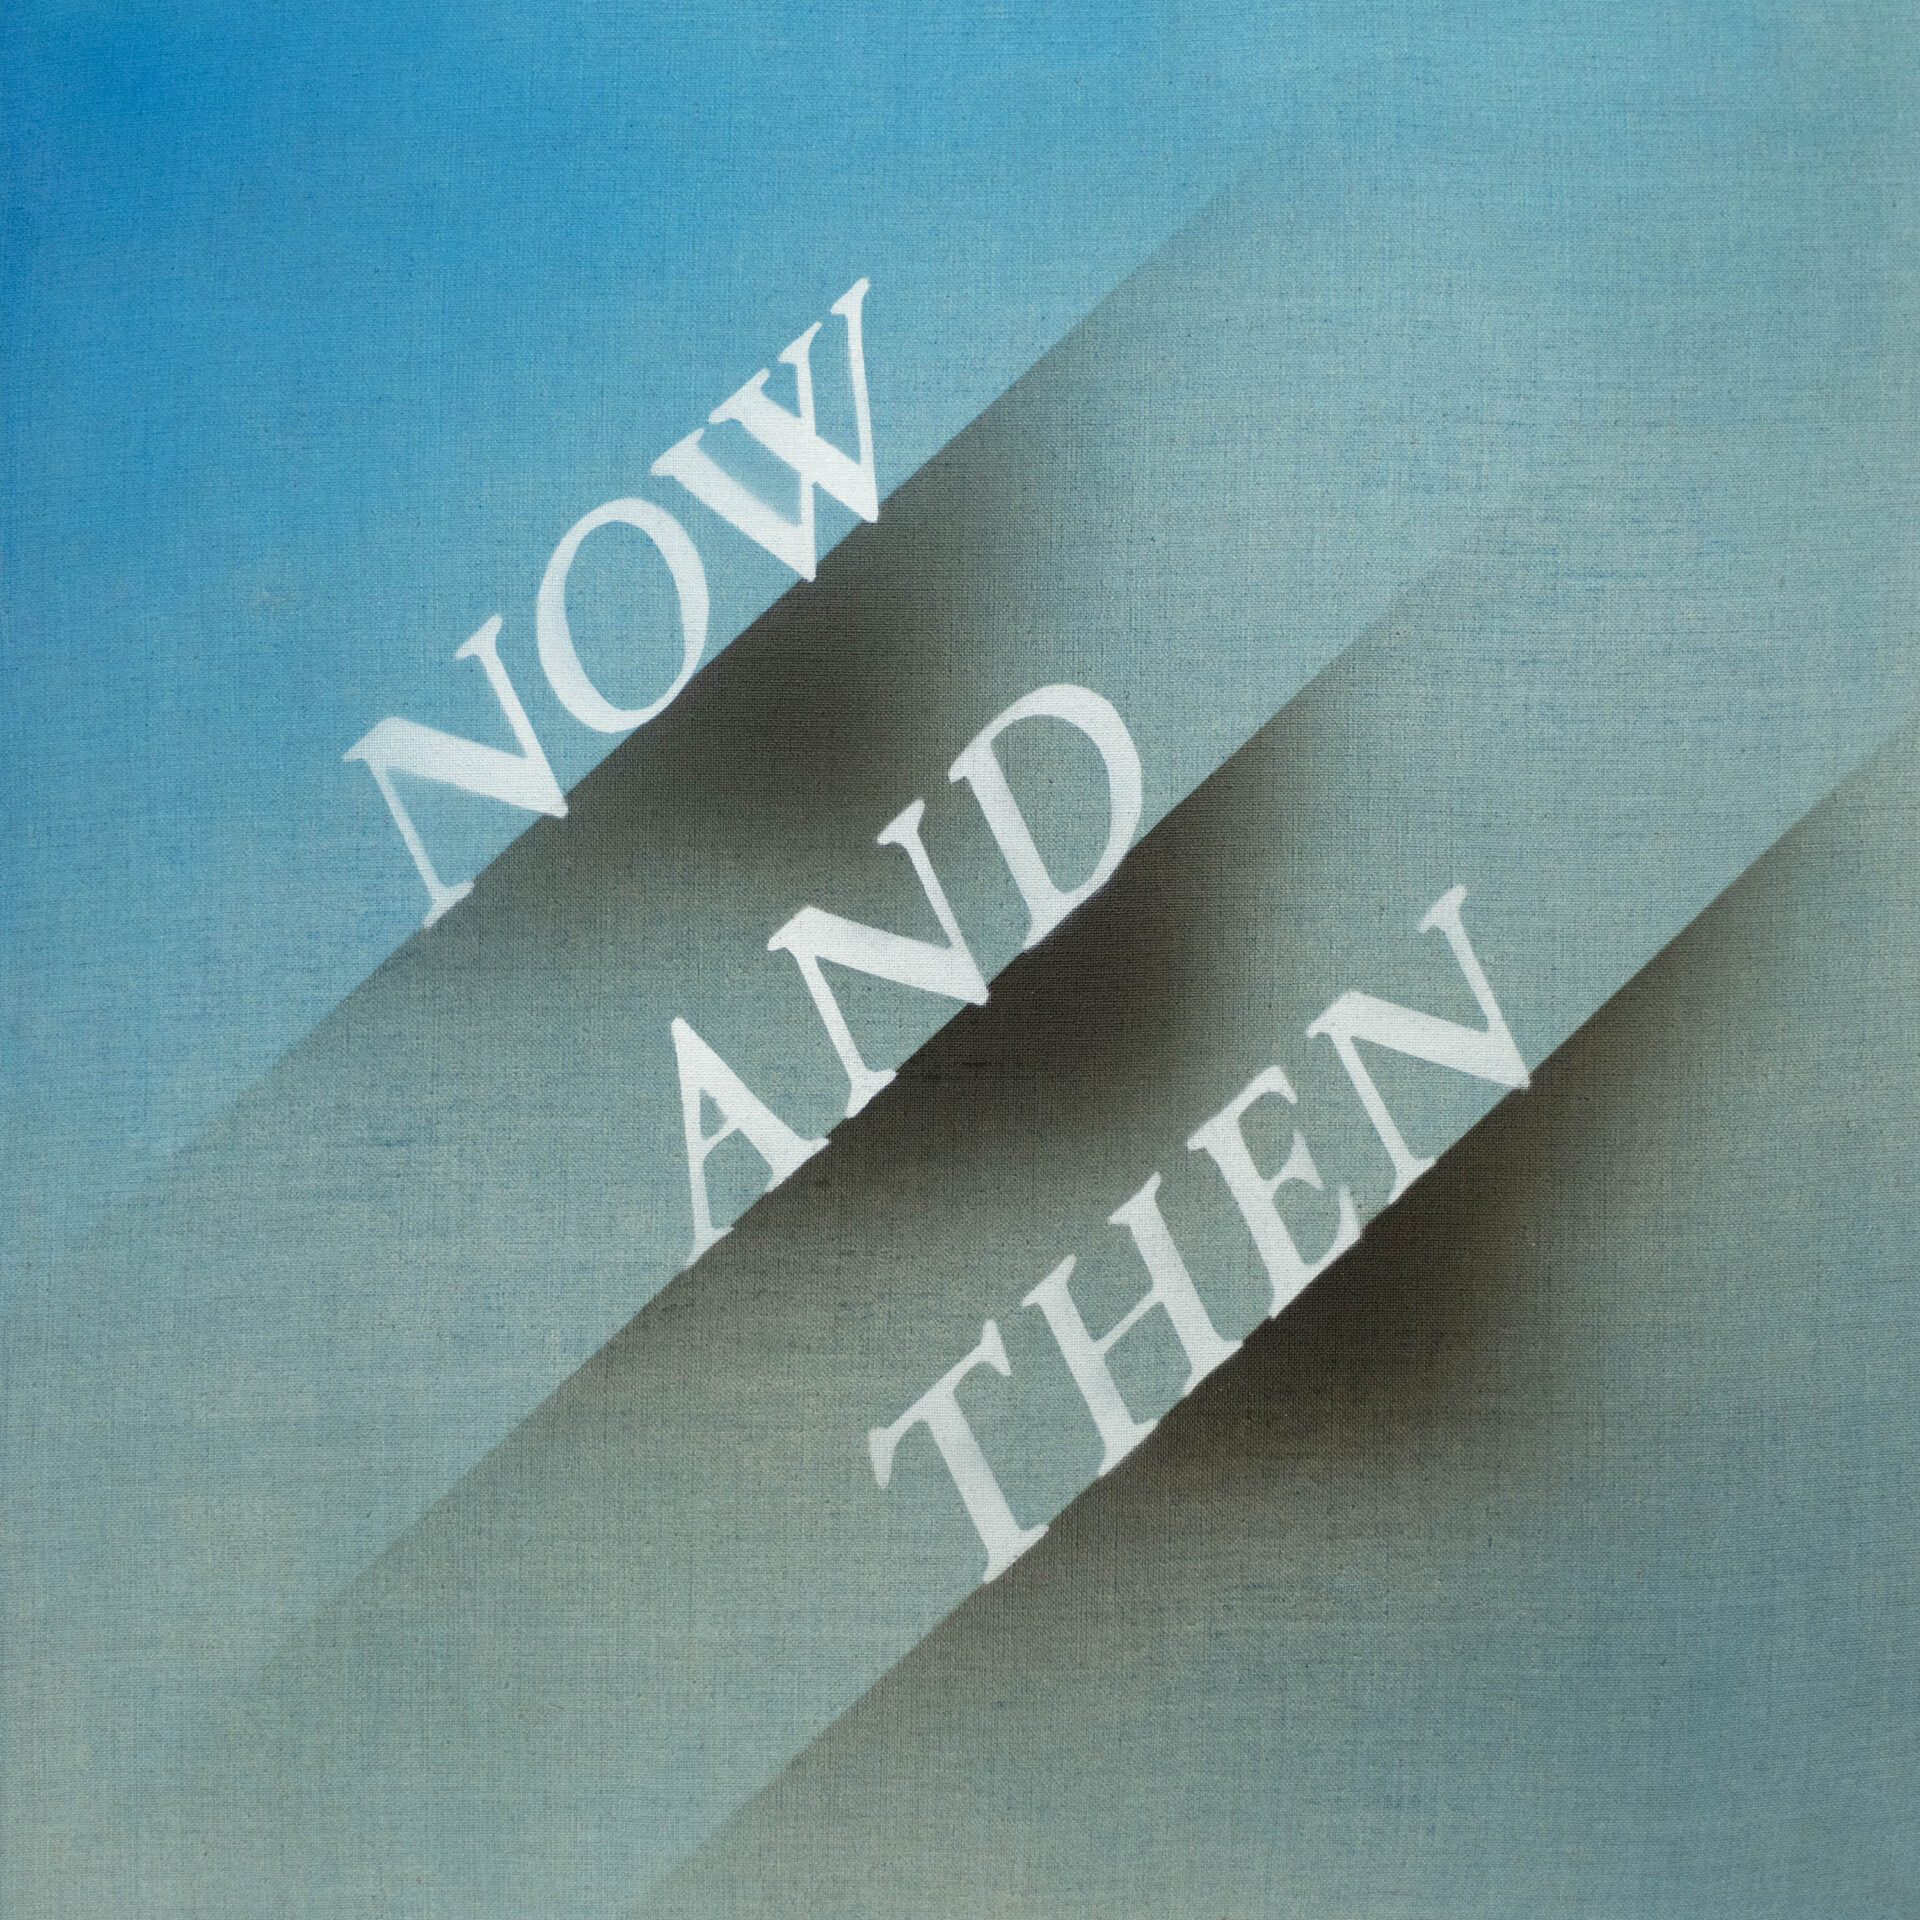 「Now And Then」ジャケット